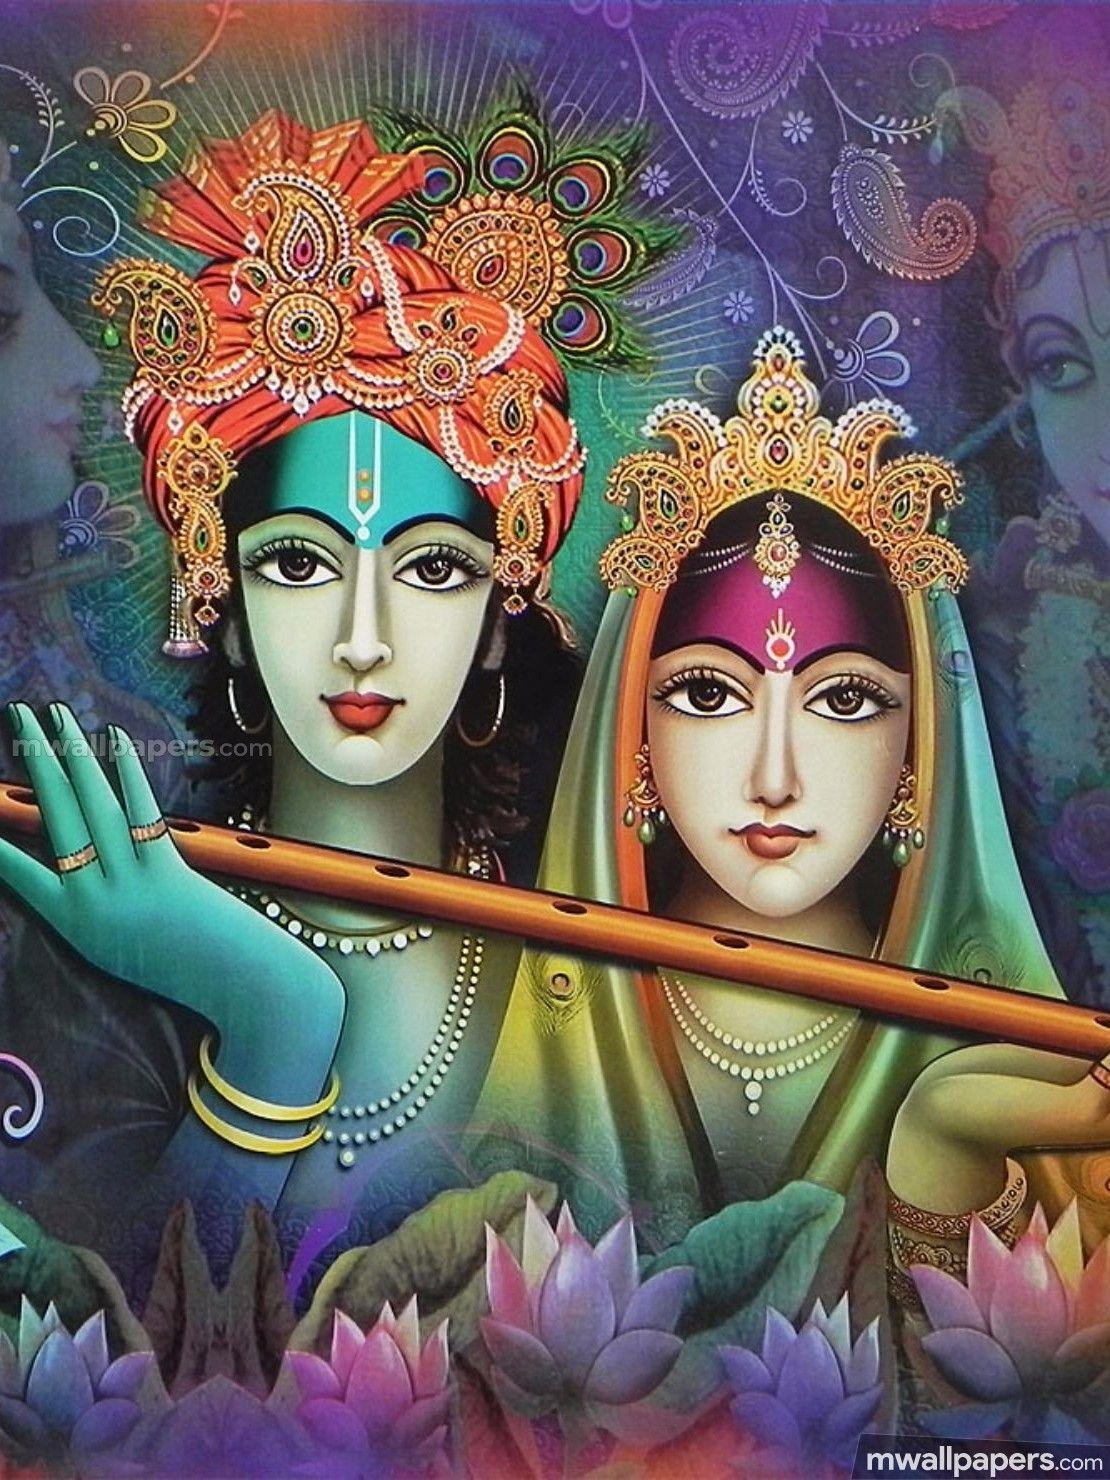 Featured image of post Krishna Radha Images Hd Wallpapers / Most beautiful lord krishna images, radha krishna hd photo and radha krishna wallpaper with family for mobile phone and desktop free download.